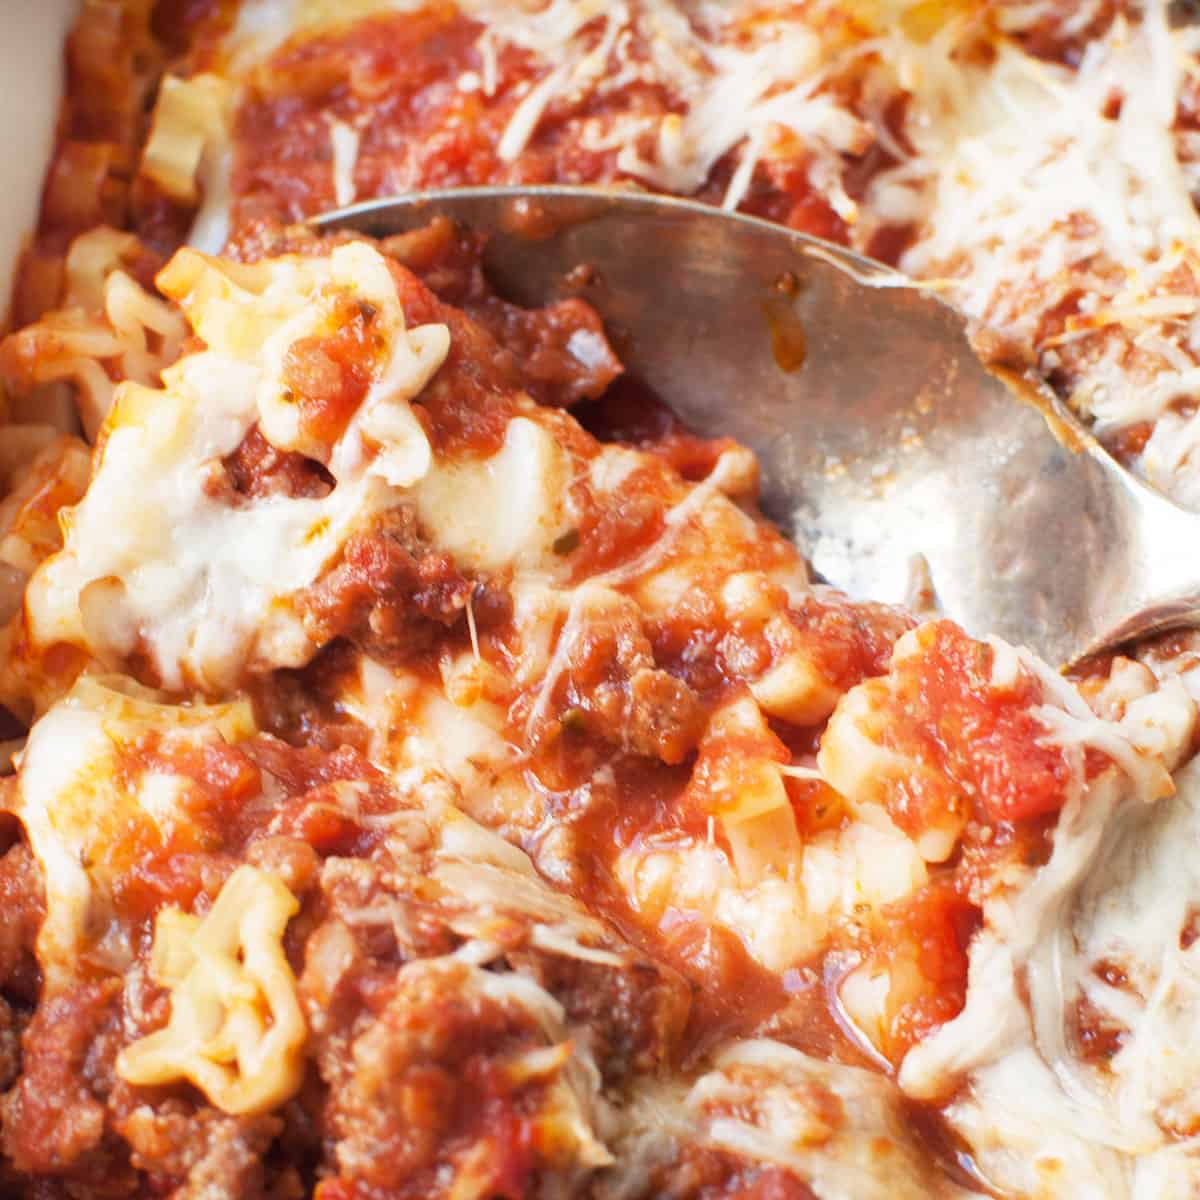 A spoon scooping Texas baked pasta.